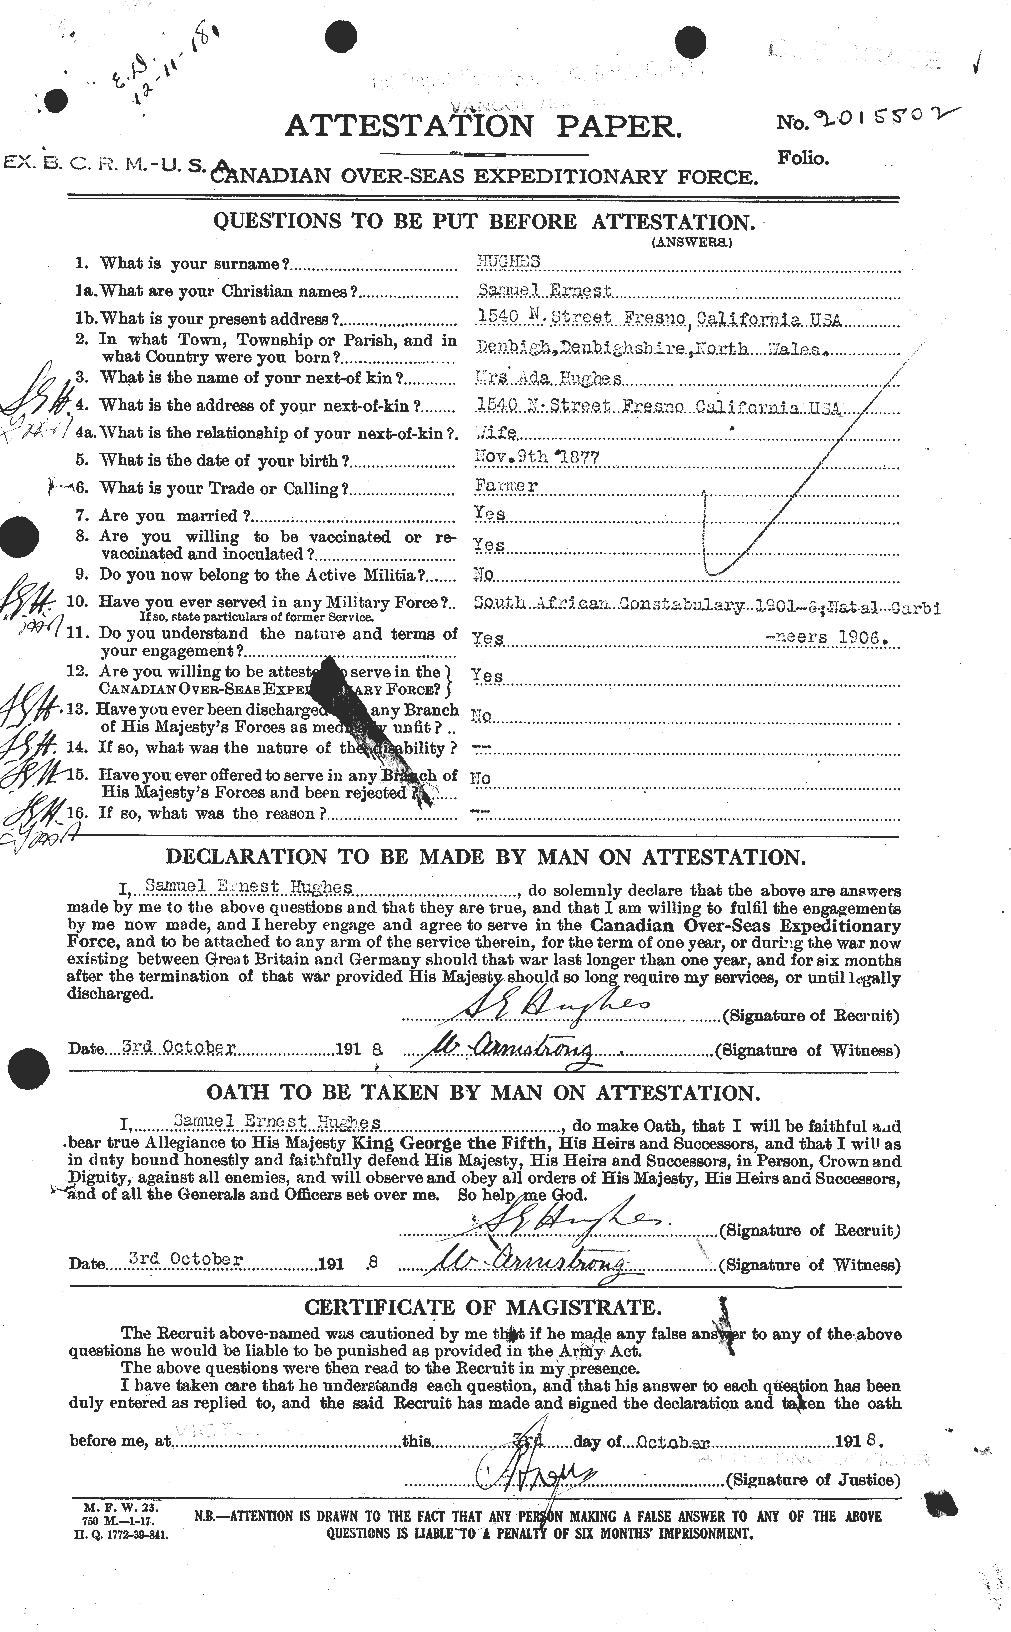 Personnel Records of the First World War - CEF 406638a